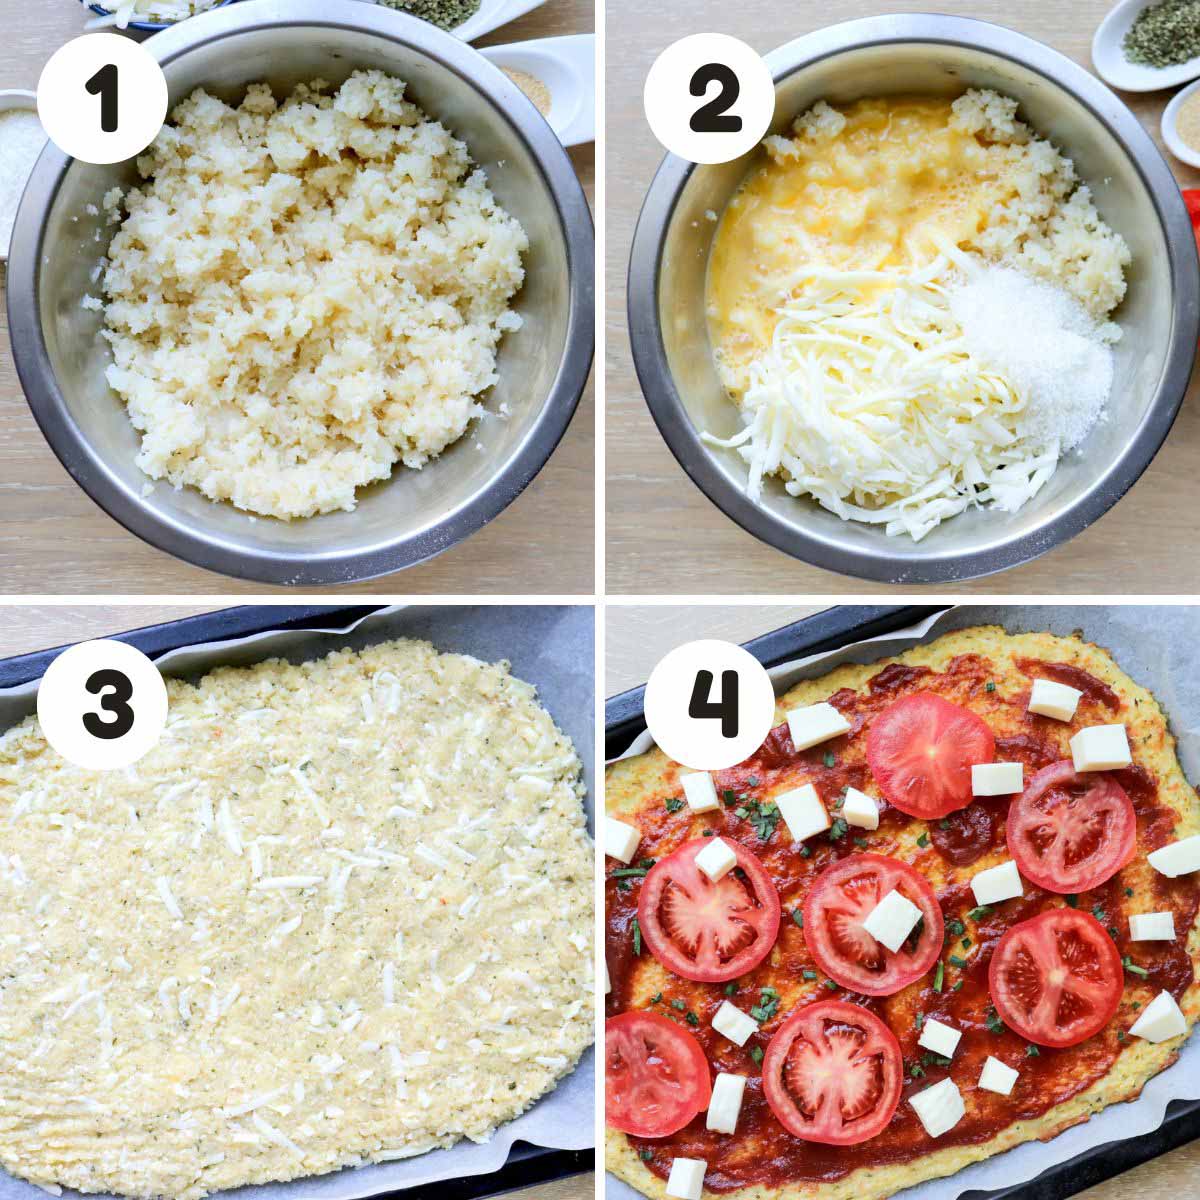 Steps to make the margherita pizza.